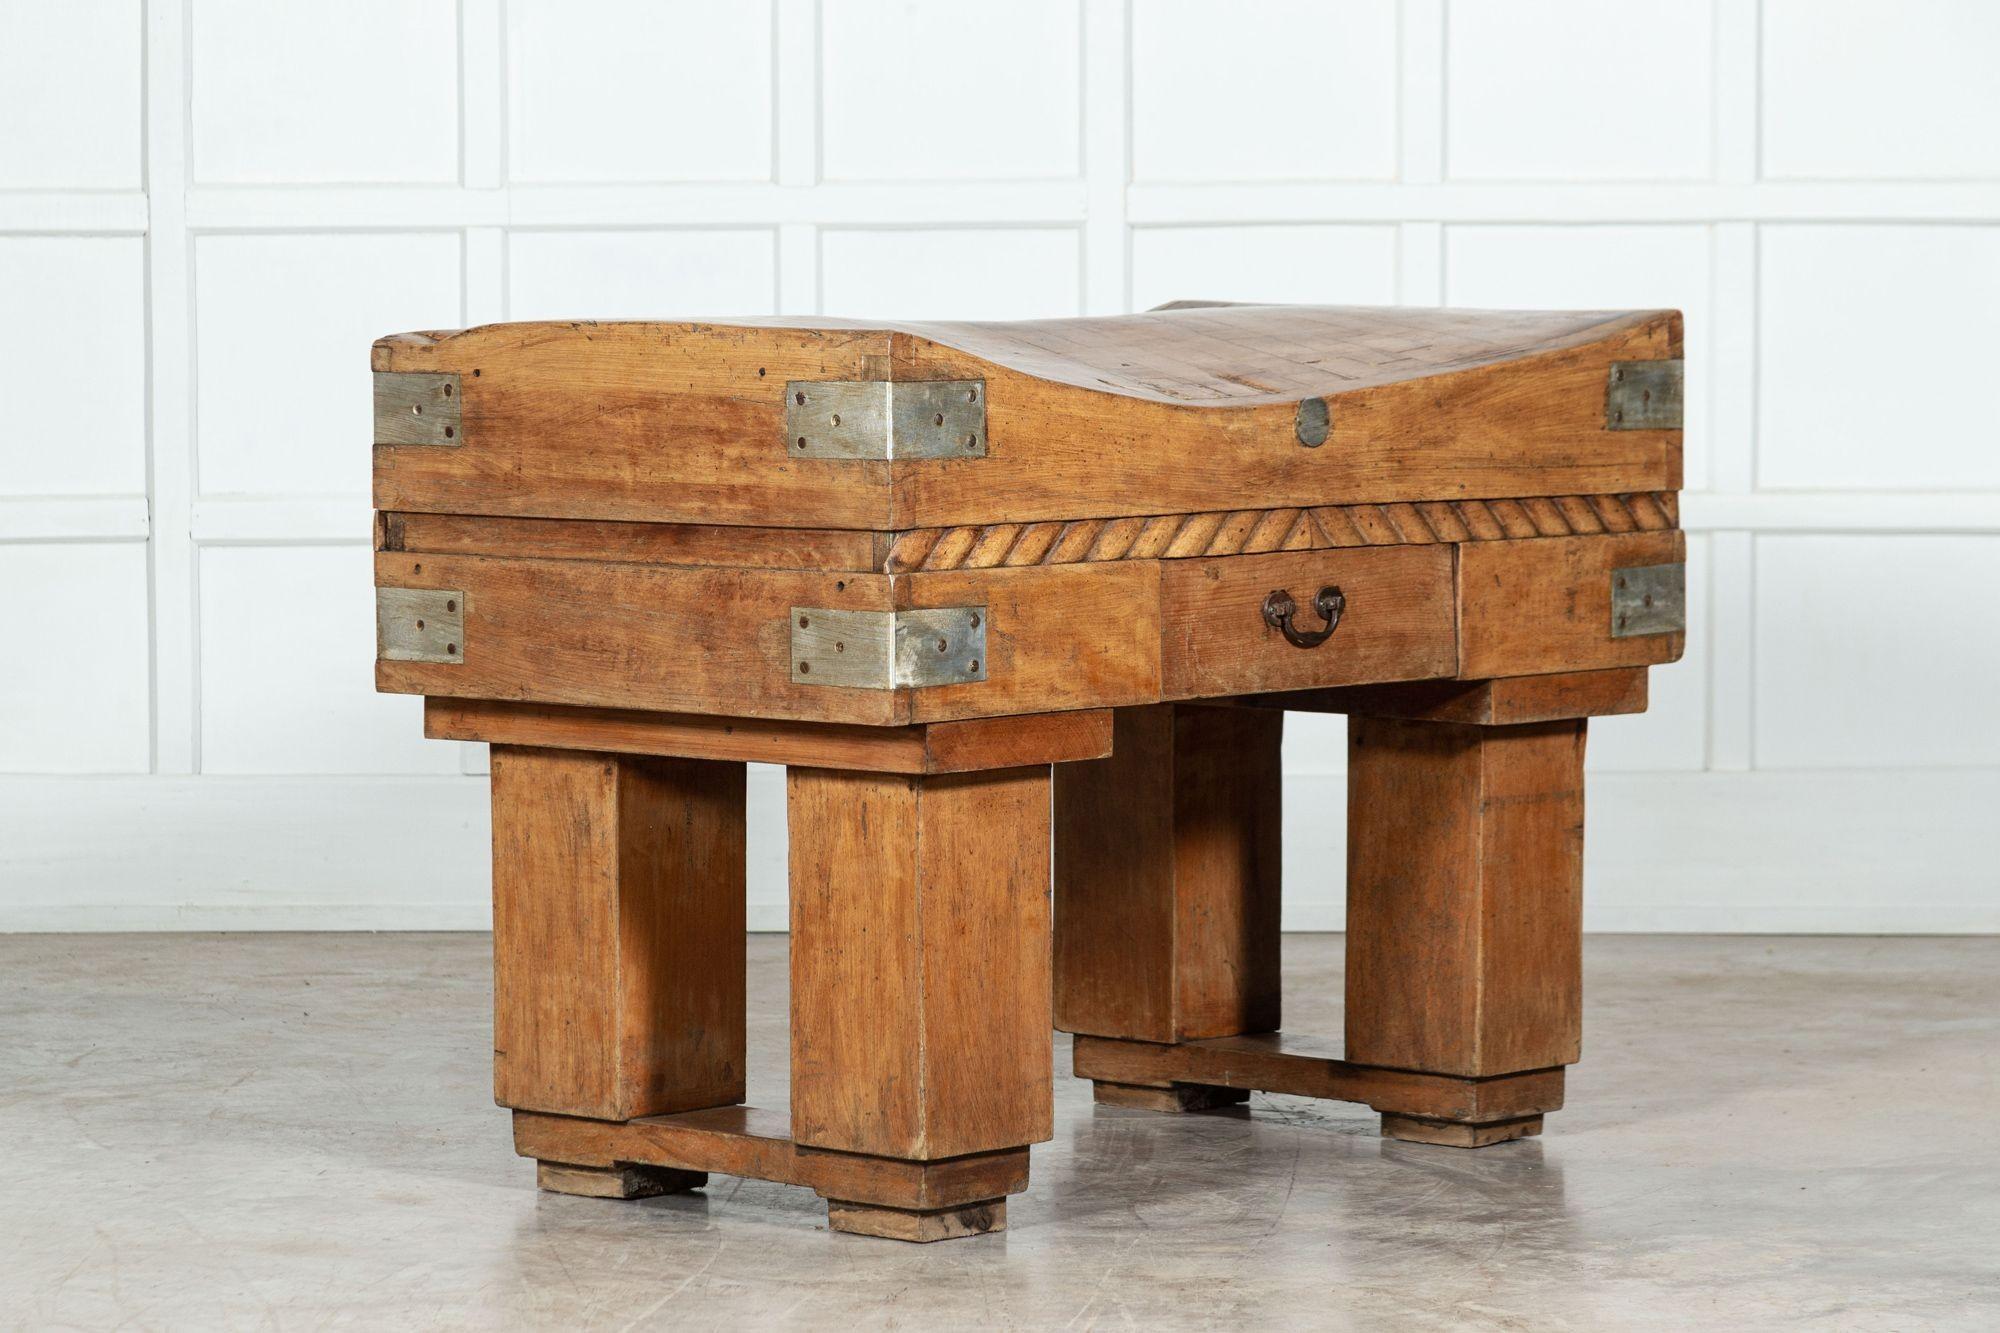 French butchers block on original stand. Beech, brown, early 20th century, circa 1930.
Great even color, size, wear and detailing. Typical French rope style carved detailing dividing the base and top. Could be used as a kitchen Island or